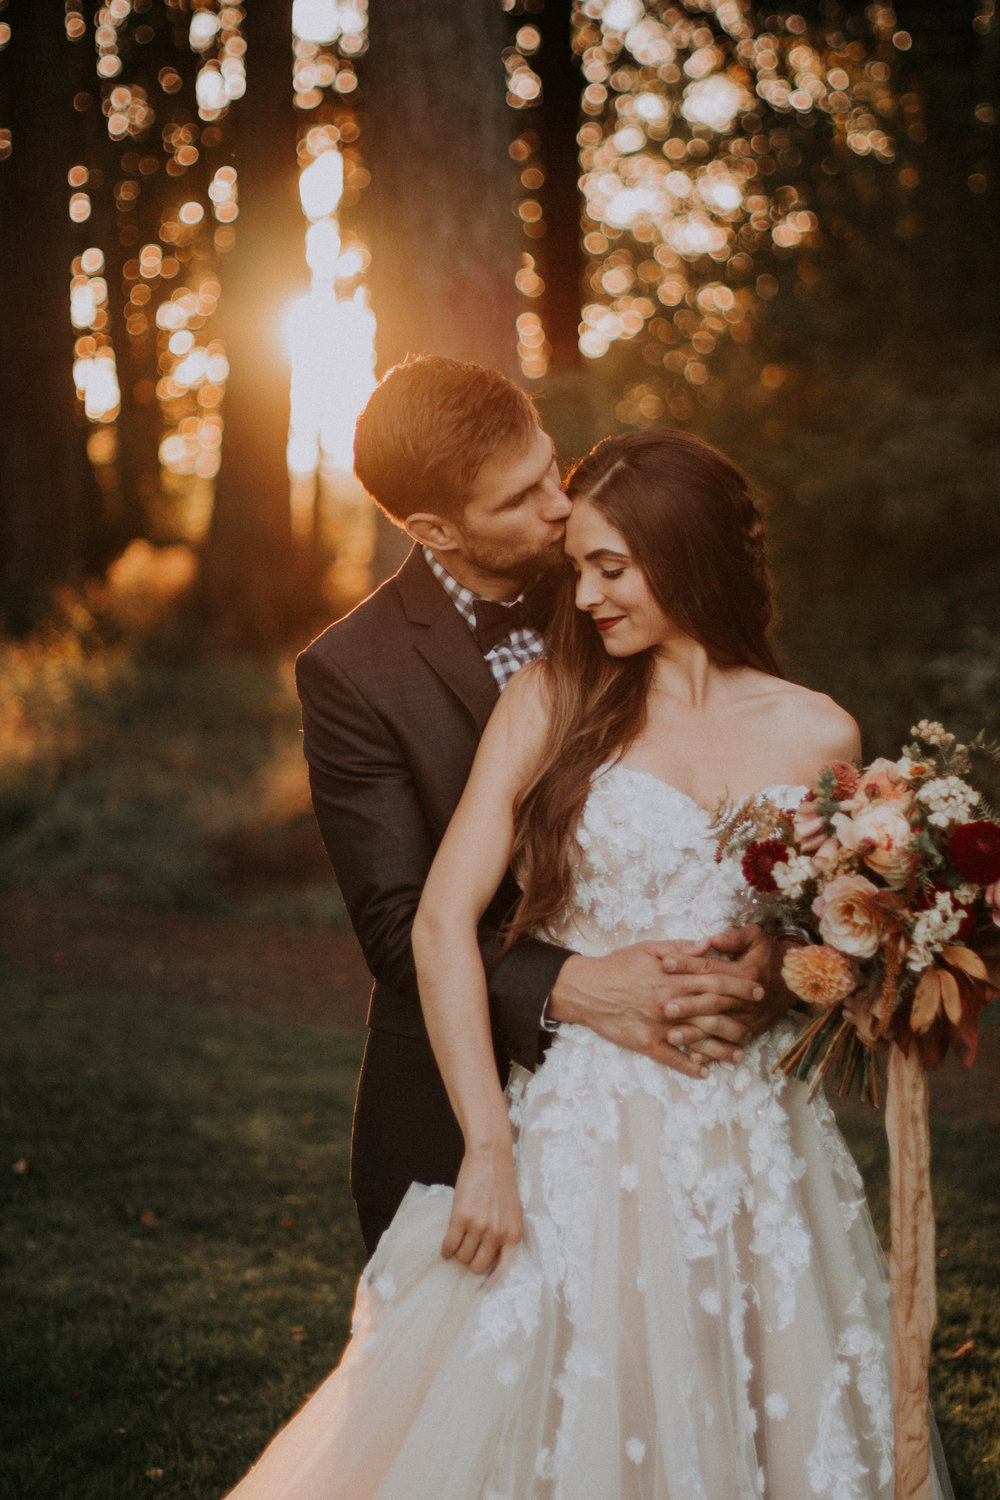 In October I had the pleasure of working with Daylinn of  Greater Than Photo  on this cozy fall-themed farmhouse shoot at Jasper House Farm and I loved every minute. Daylinn captured everything beautifully and the photos are currently featured in my 2018 weddings guide (you can download a copy under the "weddings" tab)!